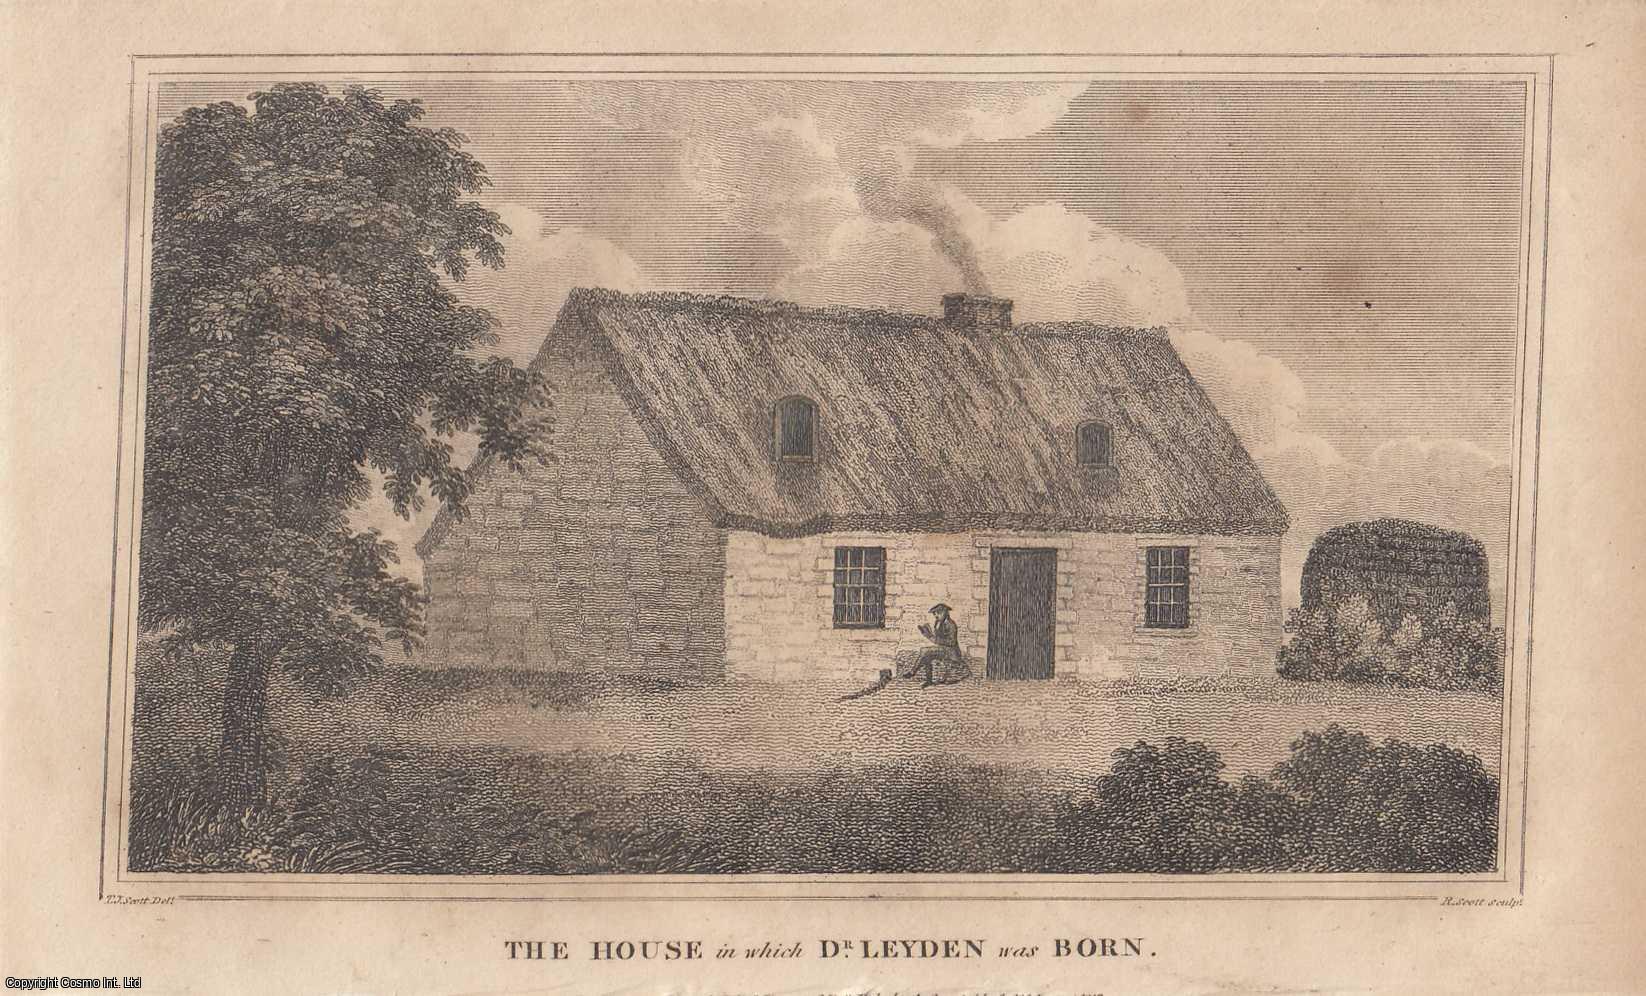 ENGRAVING - The House in which Dr Leyden was born. An original item from the Scots Magazine, 1817.